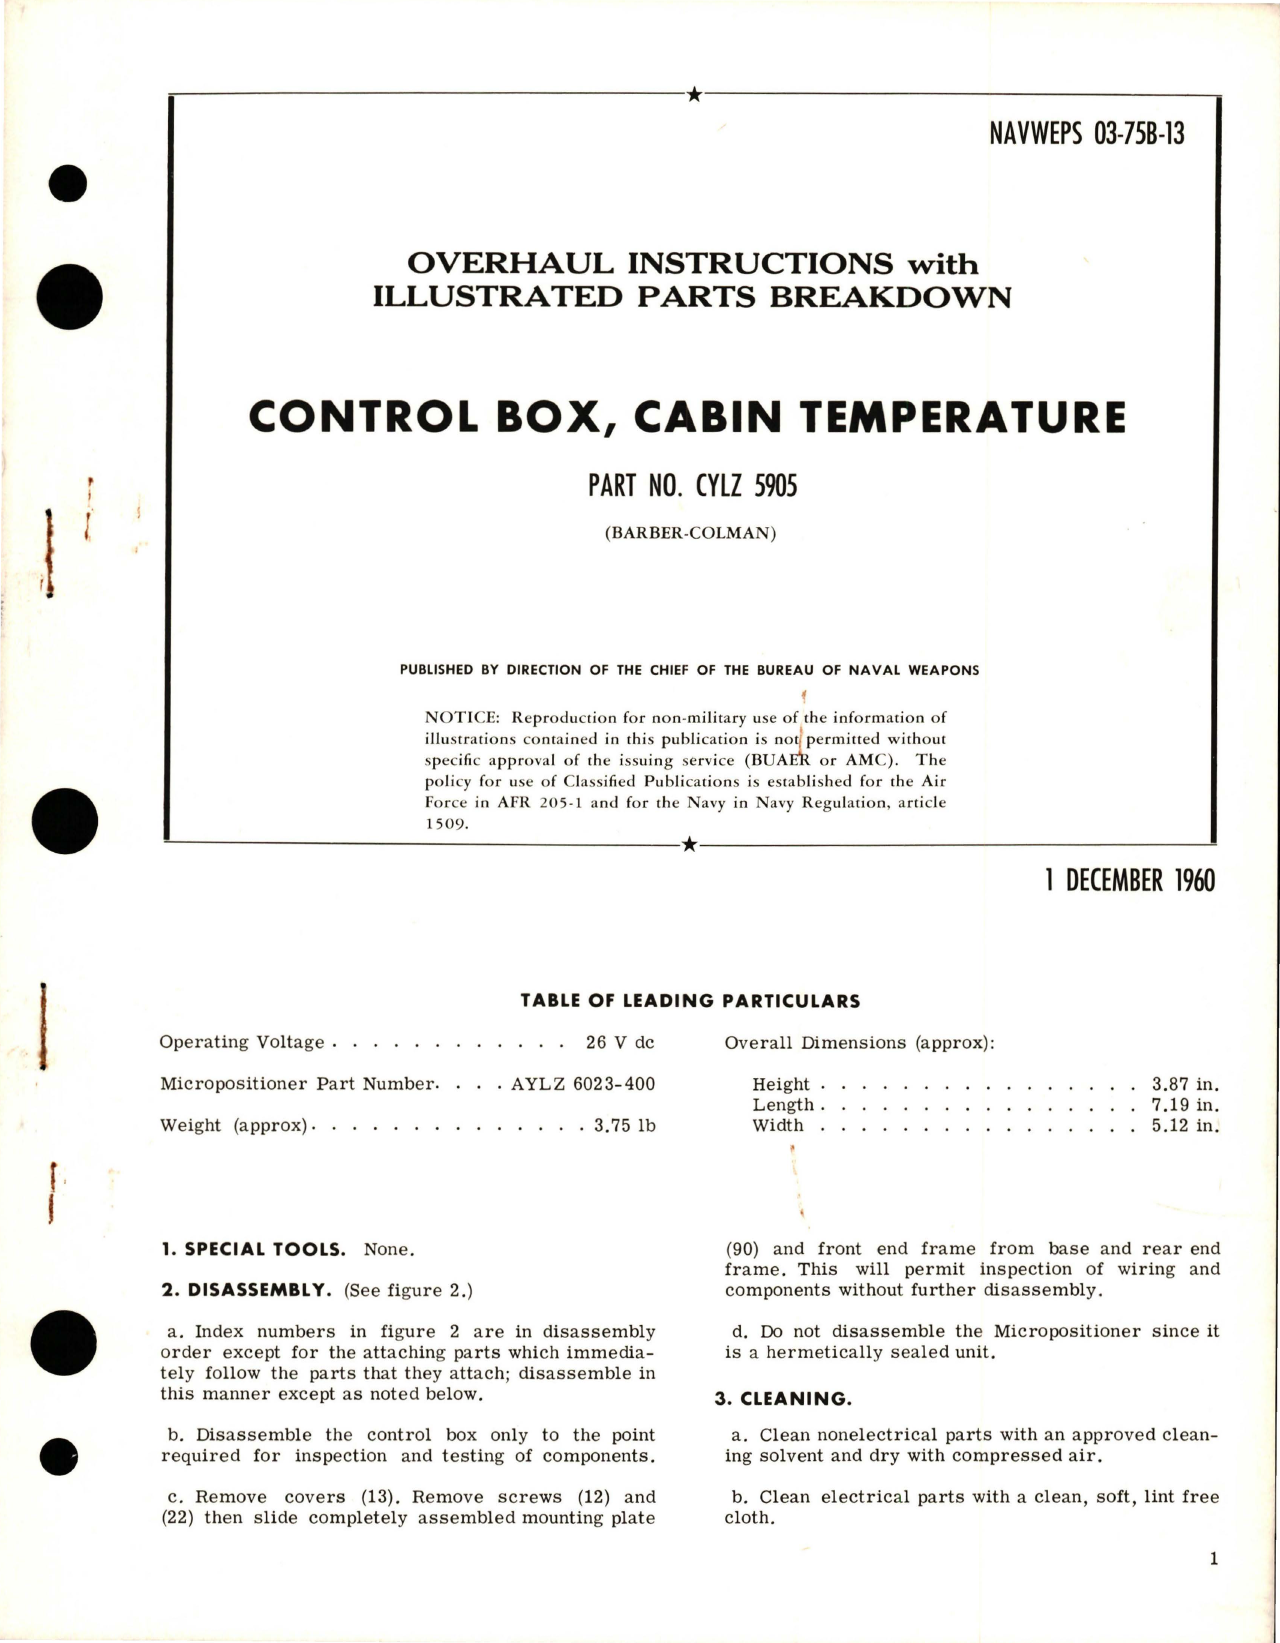 Sample page 1 from AirCorps Library document: Overhaul Instructions with Illustrated Parts Breakdown for Cabin Temperature Control Box - Part CYLZ 5905 